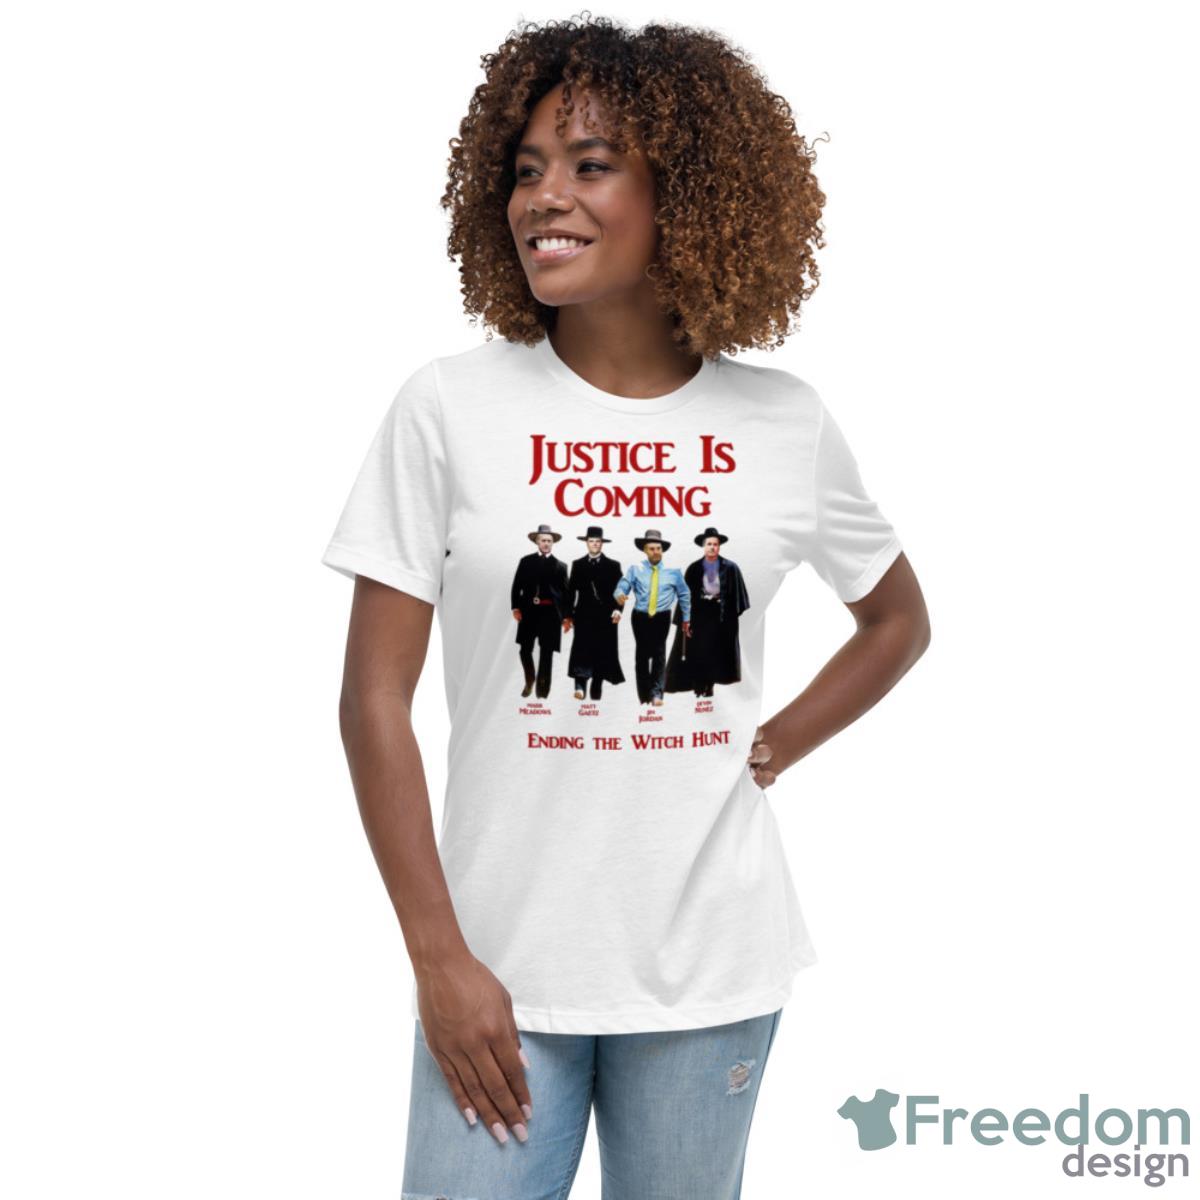 Justice Is Coming Ending The Witch Hunt Jim Jordan & Others Shirt